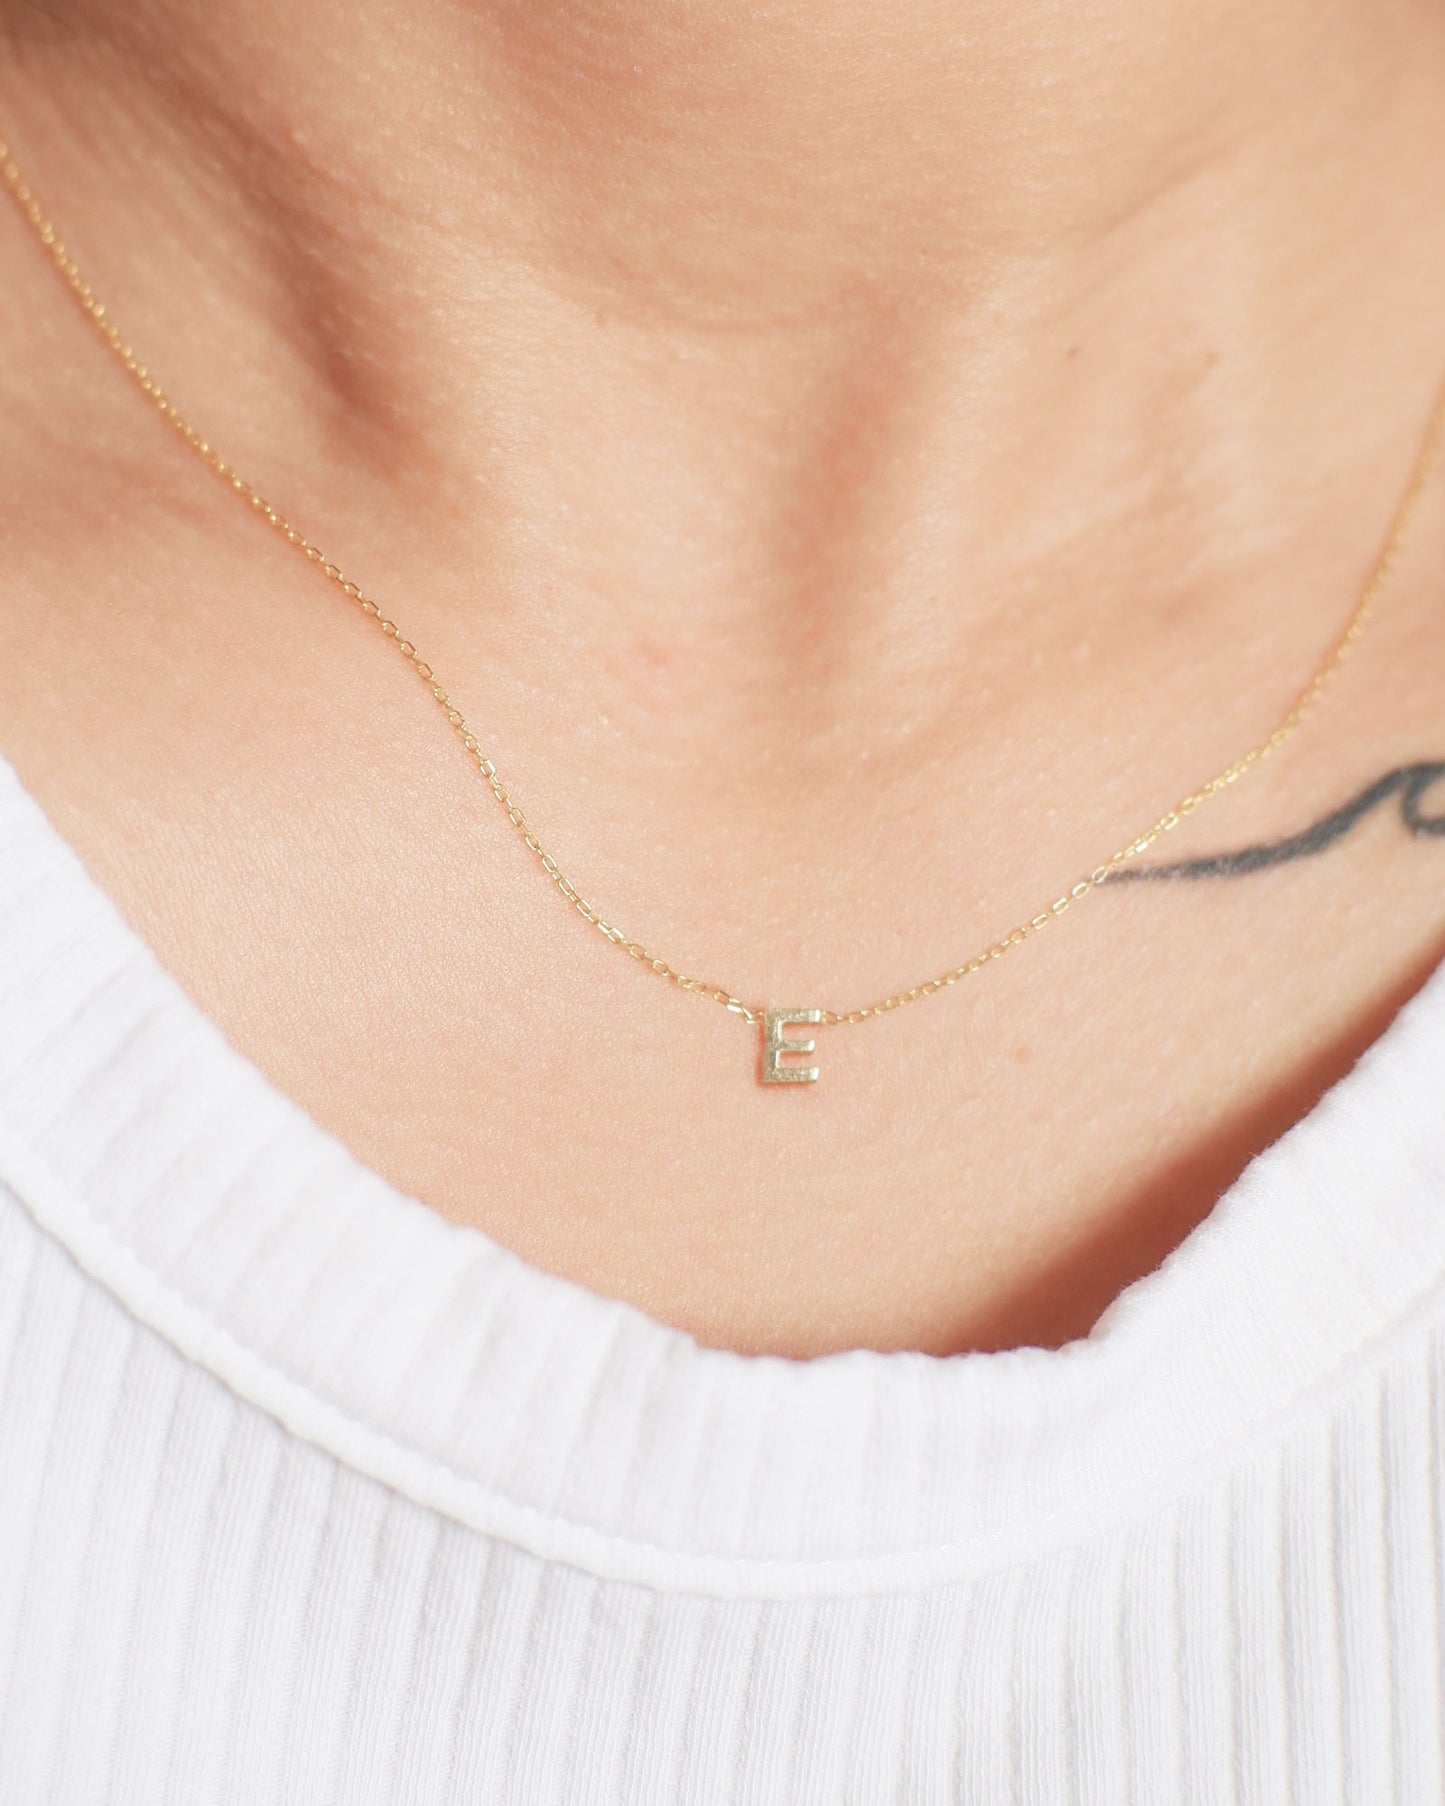 The Centered or Sideways Initial Necklace in Solid Gold